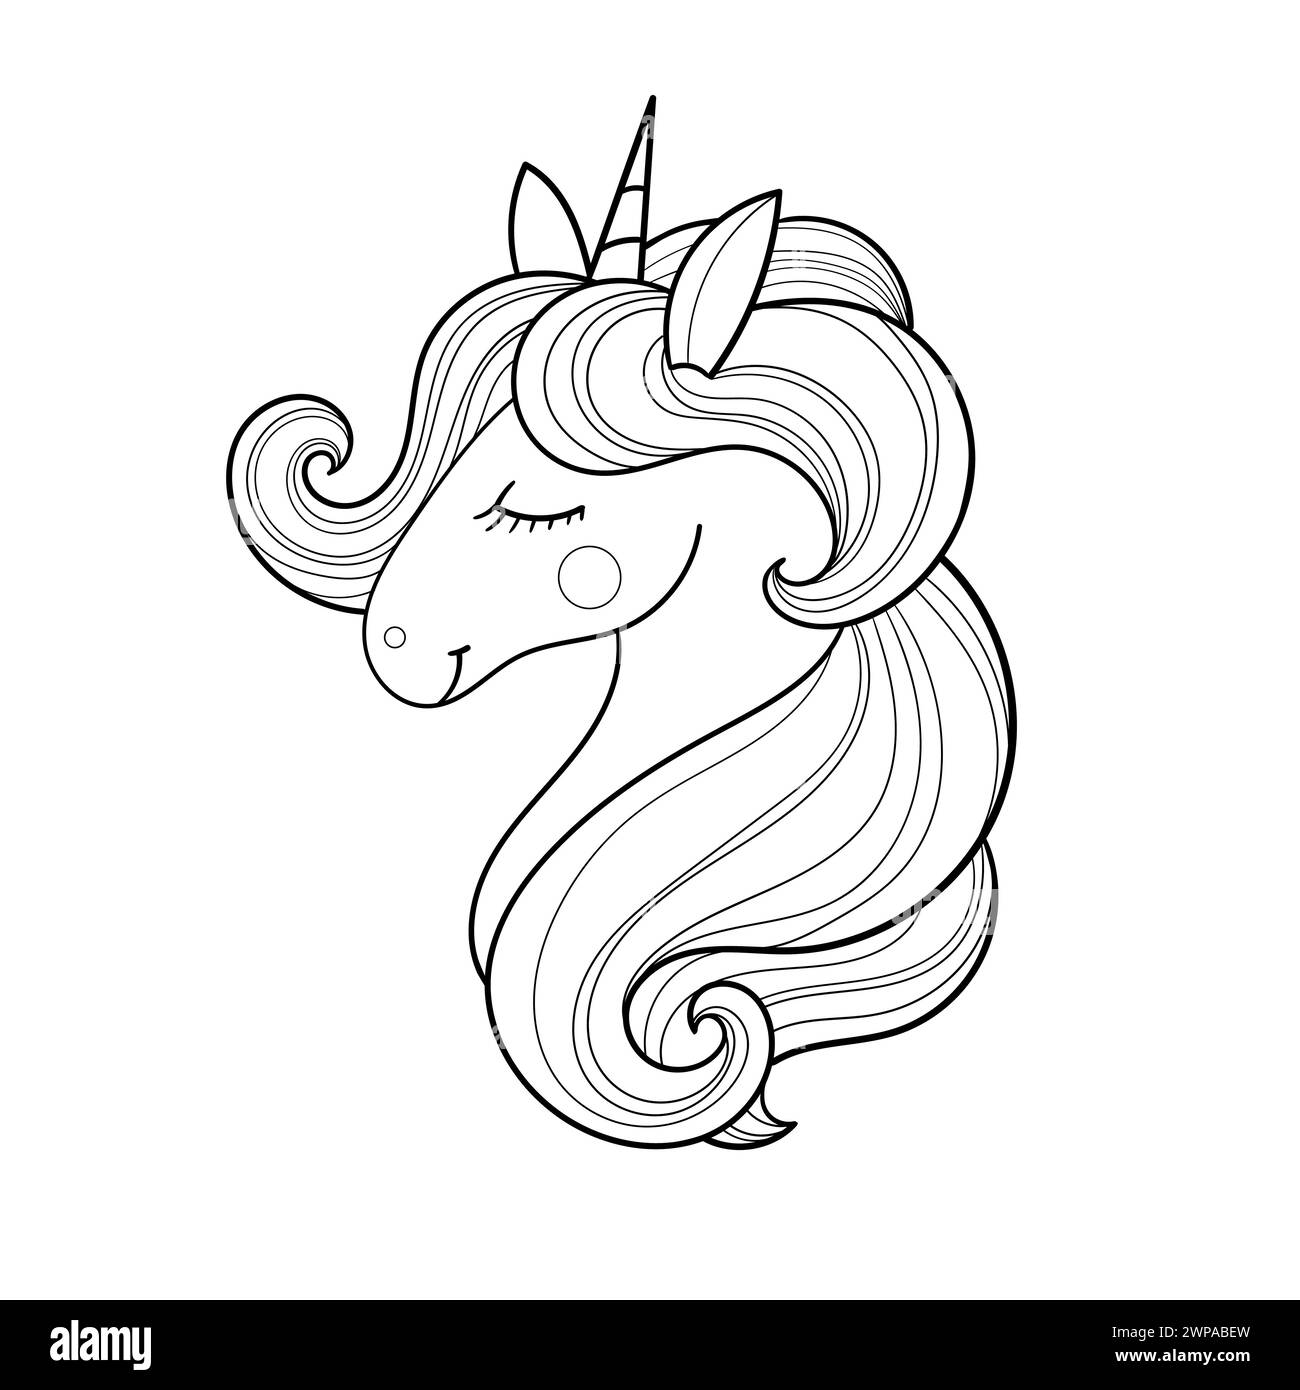 Unicorn head with mane. Black and white linear drawing. Fantastic character. For children's design of coloring books, prints, posters, cards, stickers Stock Vector